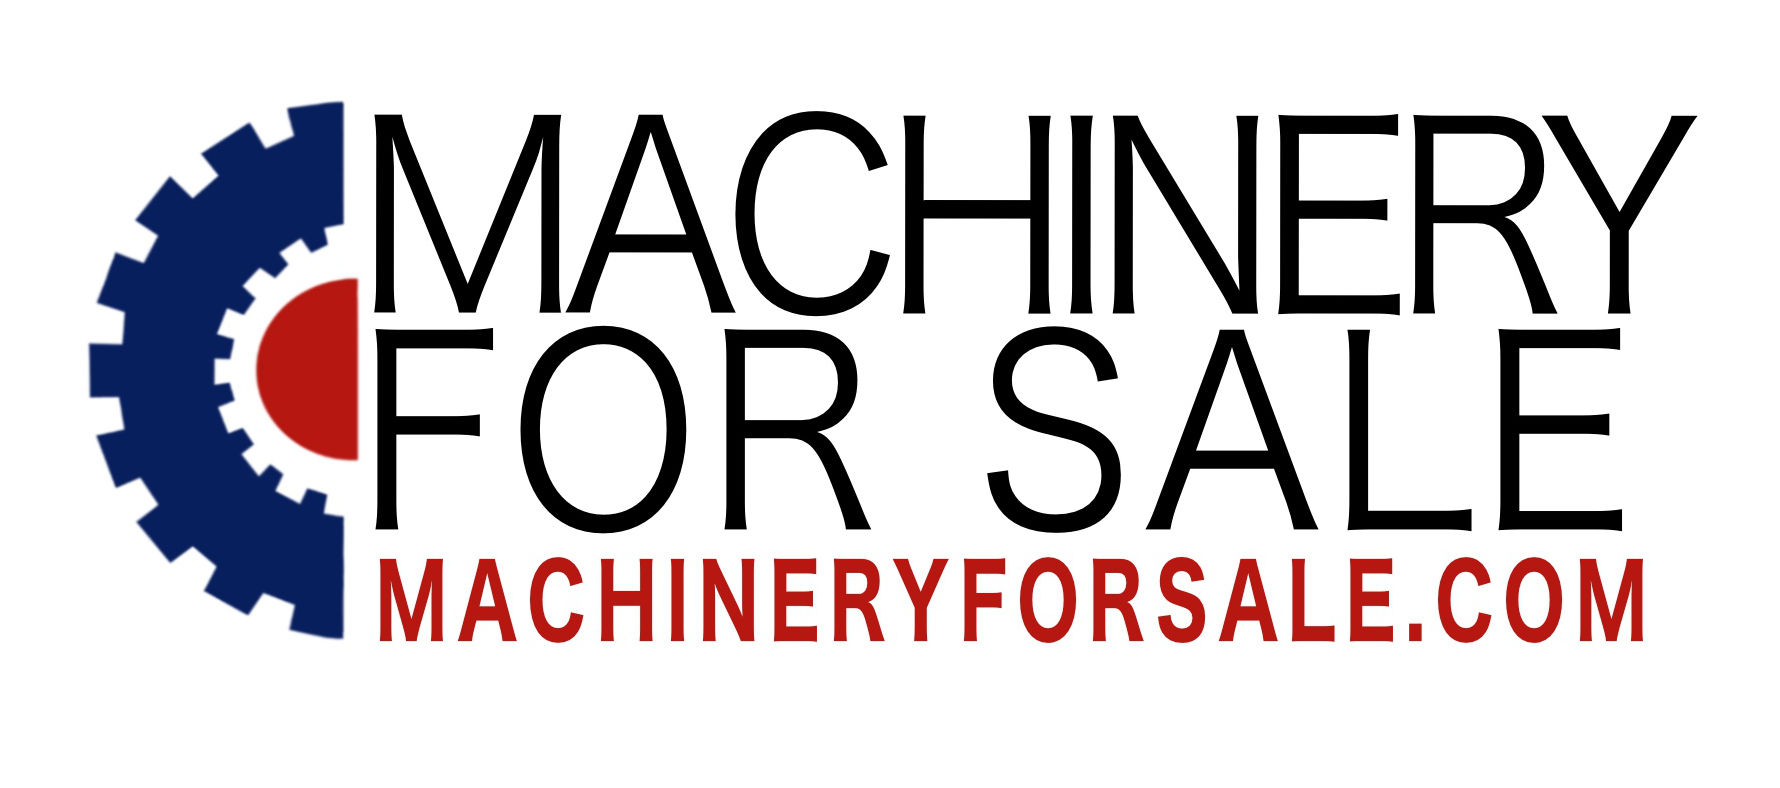 Machinery For Sale Logo